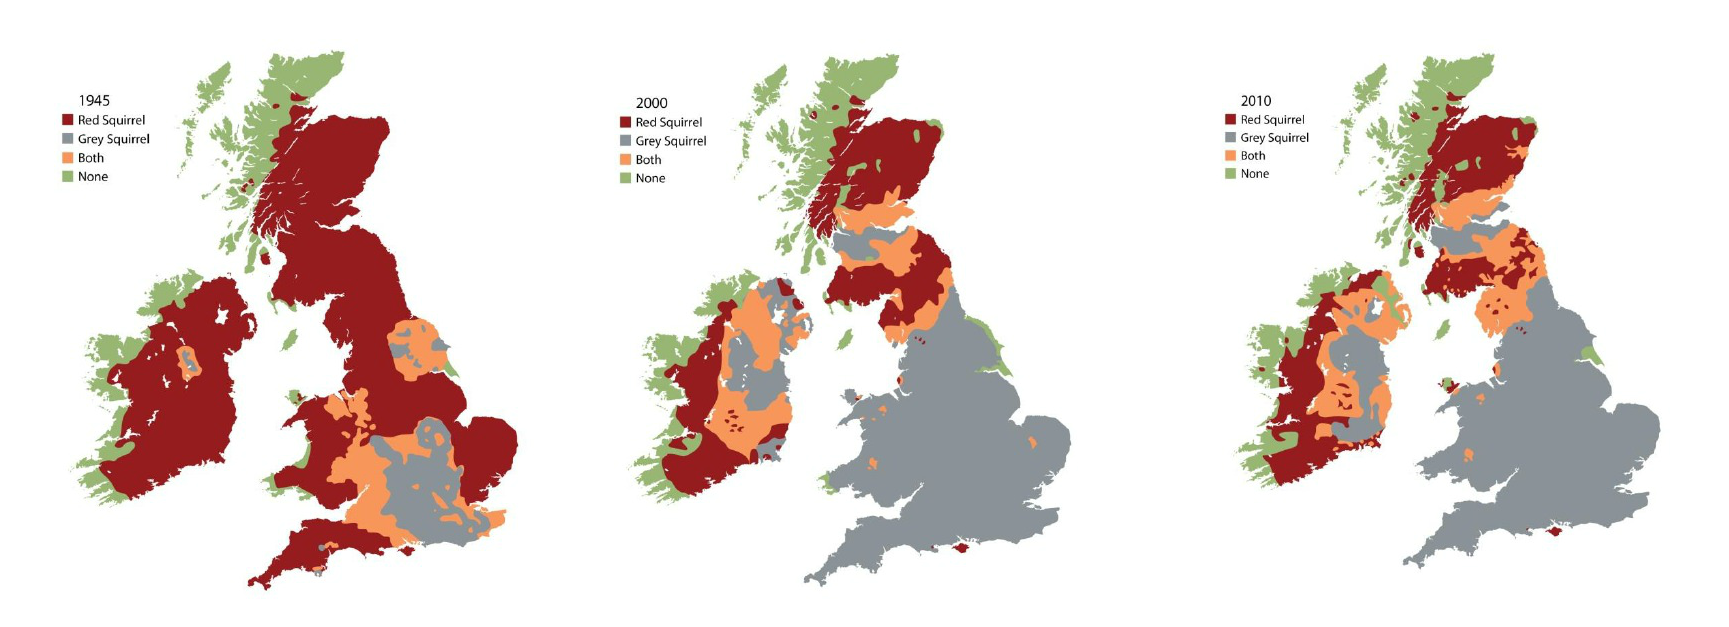 Three images of the United Kingdom and Ireland next to each other shaded in different areas: red, green, grey and orange. The map to the left has significantly more red area than the middle and right maps which have significantly more grey areas.